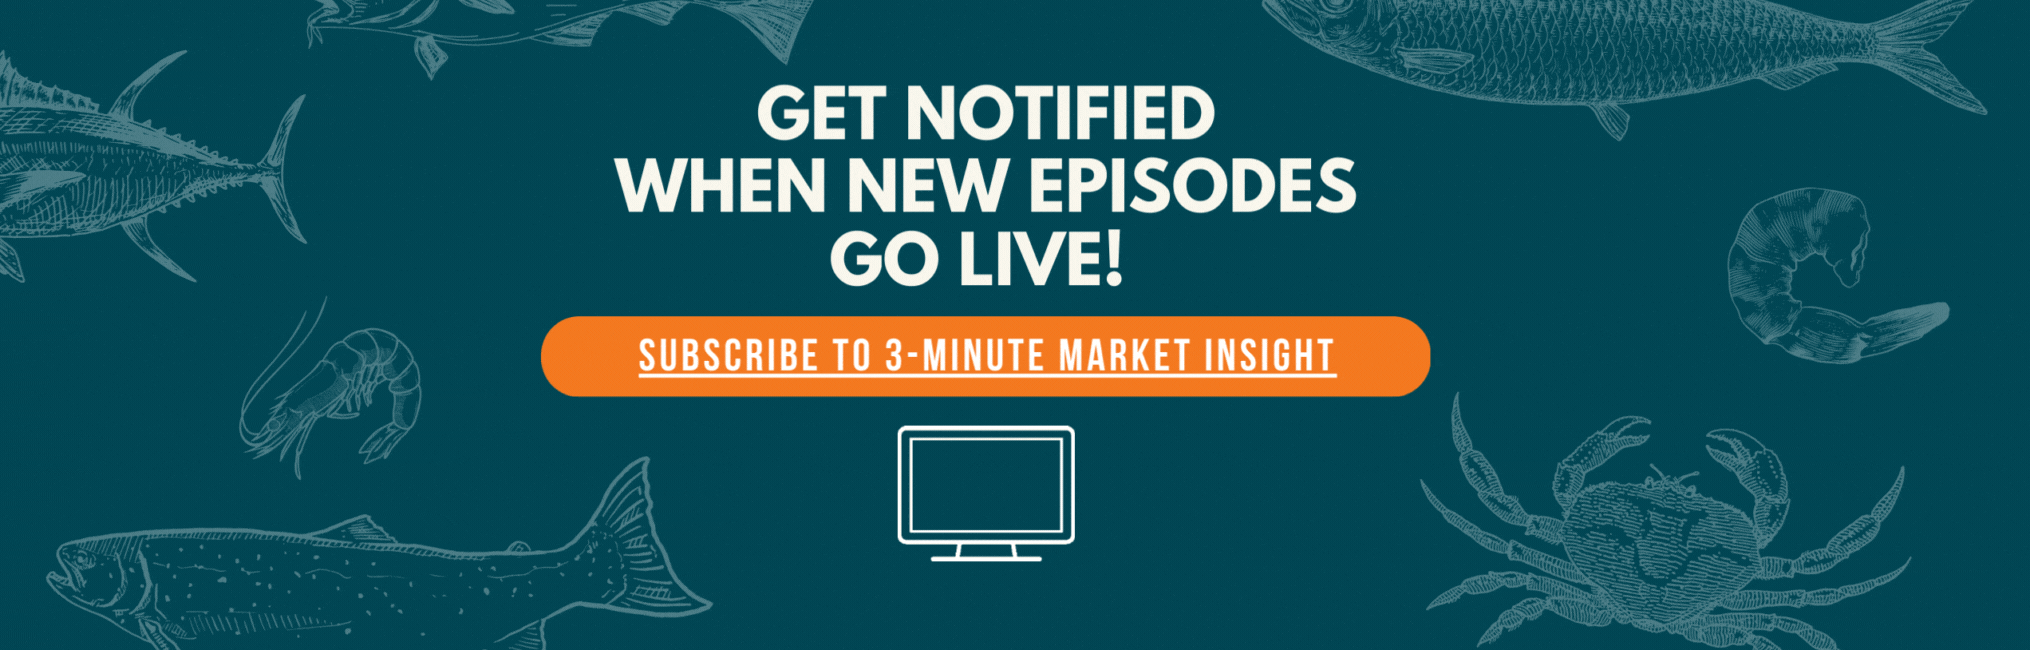 SUBSCRIBE TO OUR 3-MINUTE MARKET INSIGHT